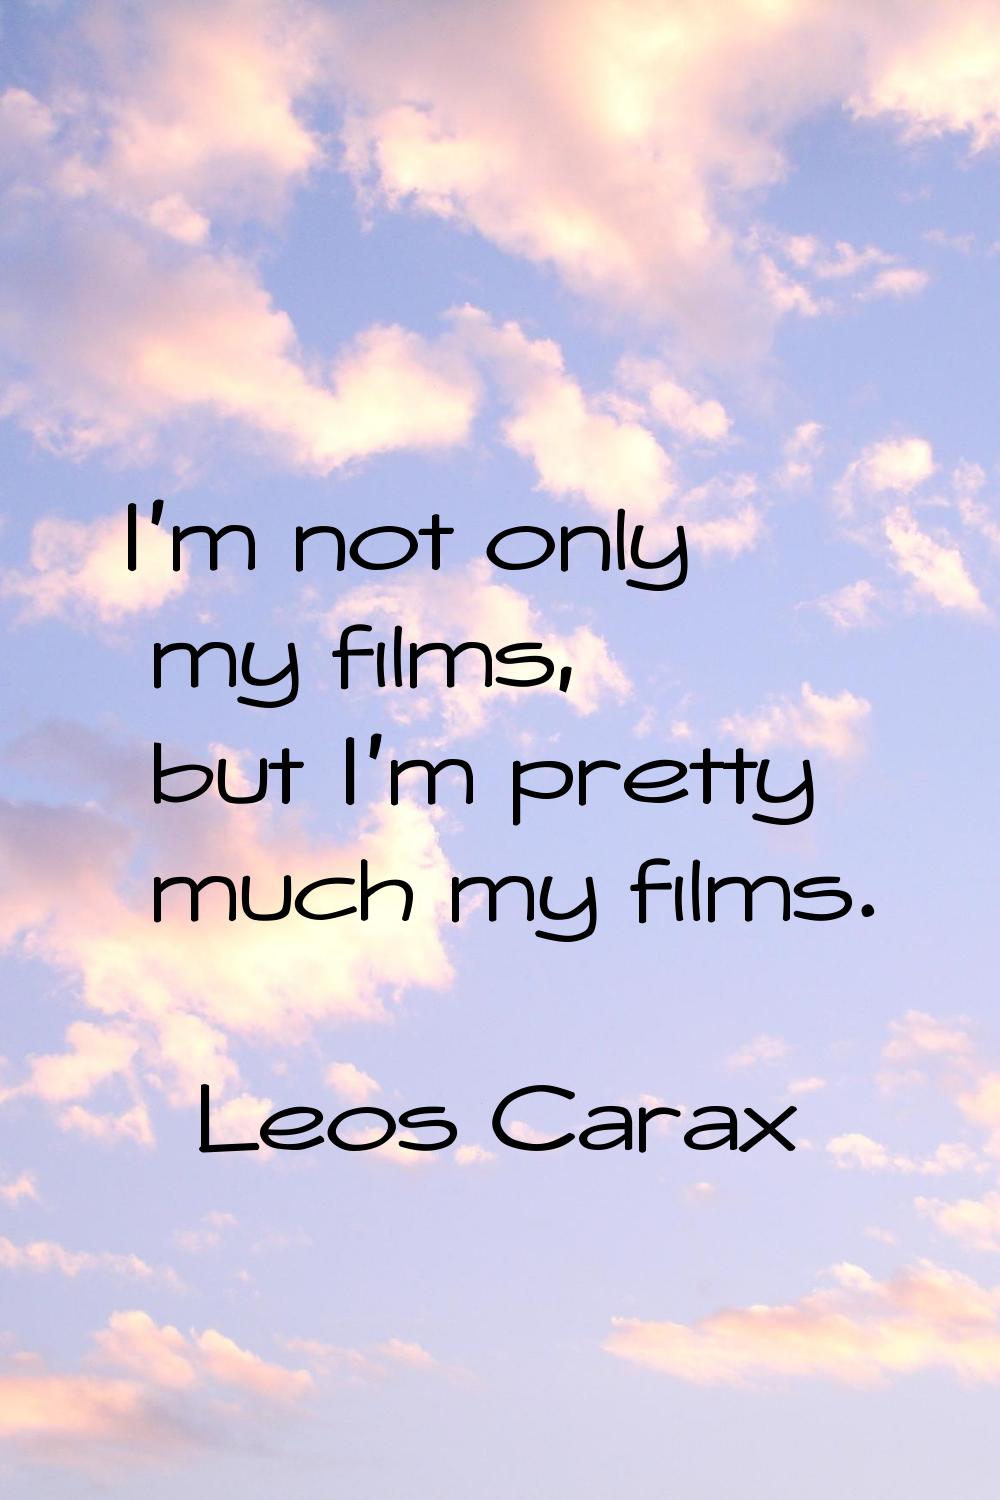 I'm not only my films, but I'm pretty much my films.